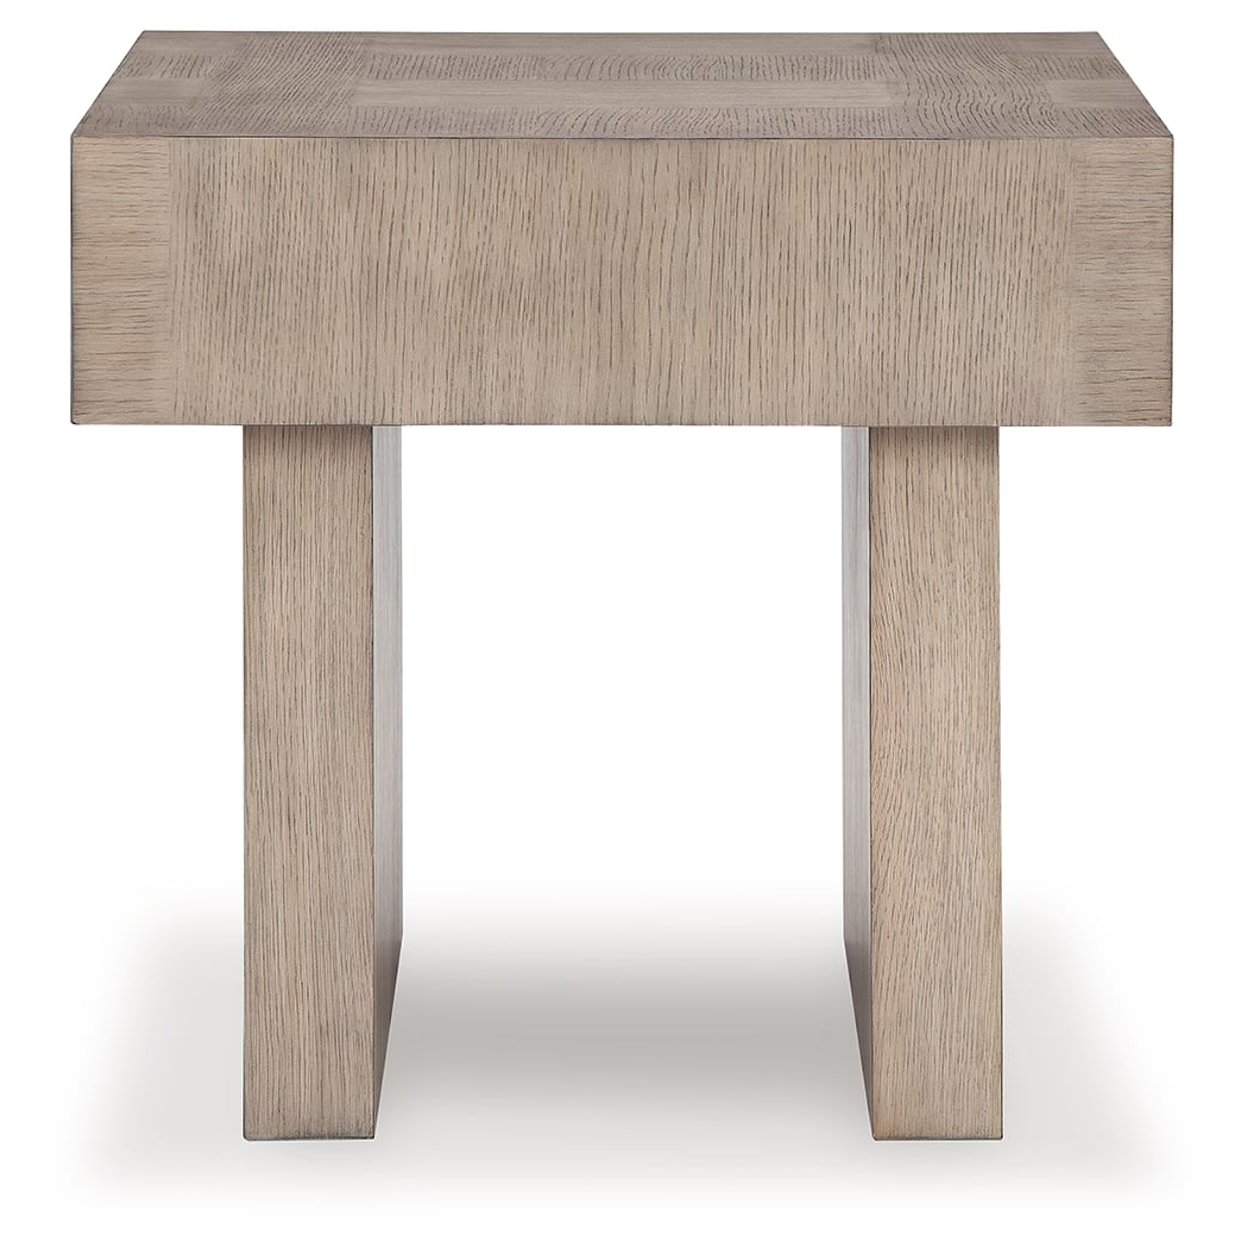 Benchcraft Jorlaina Coffee Table and 2 End Tables